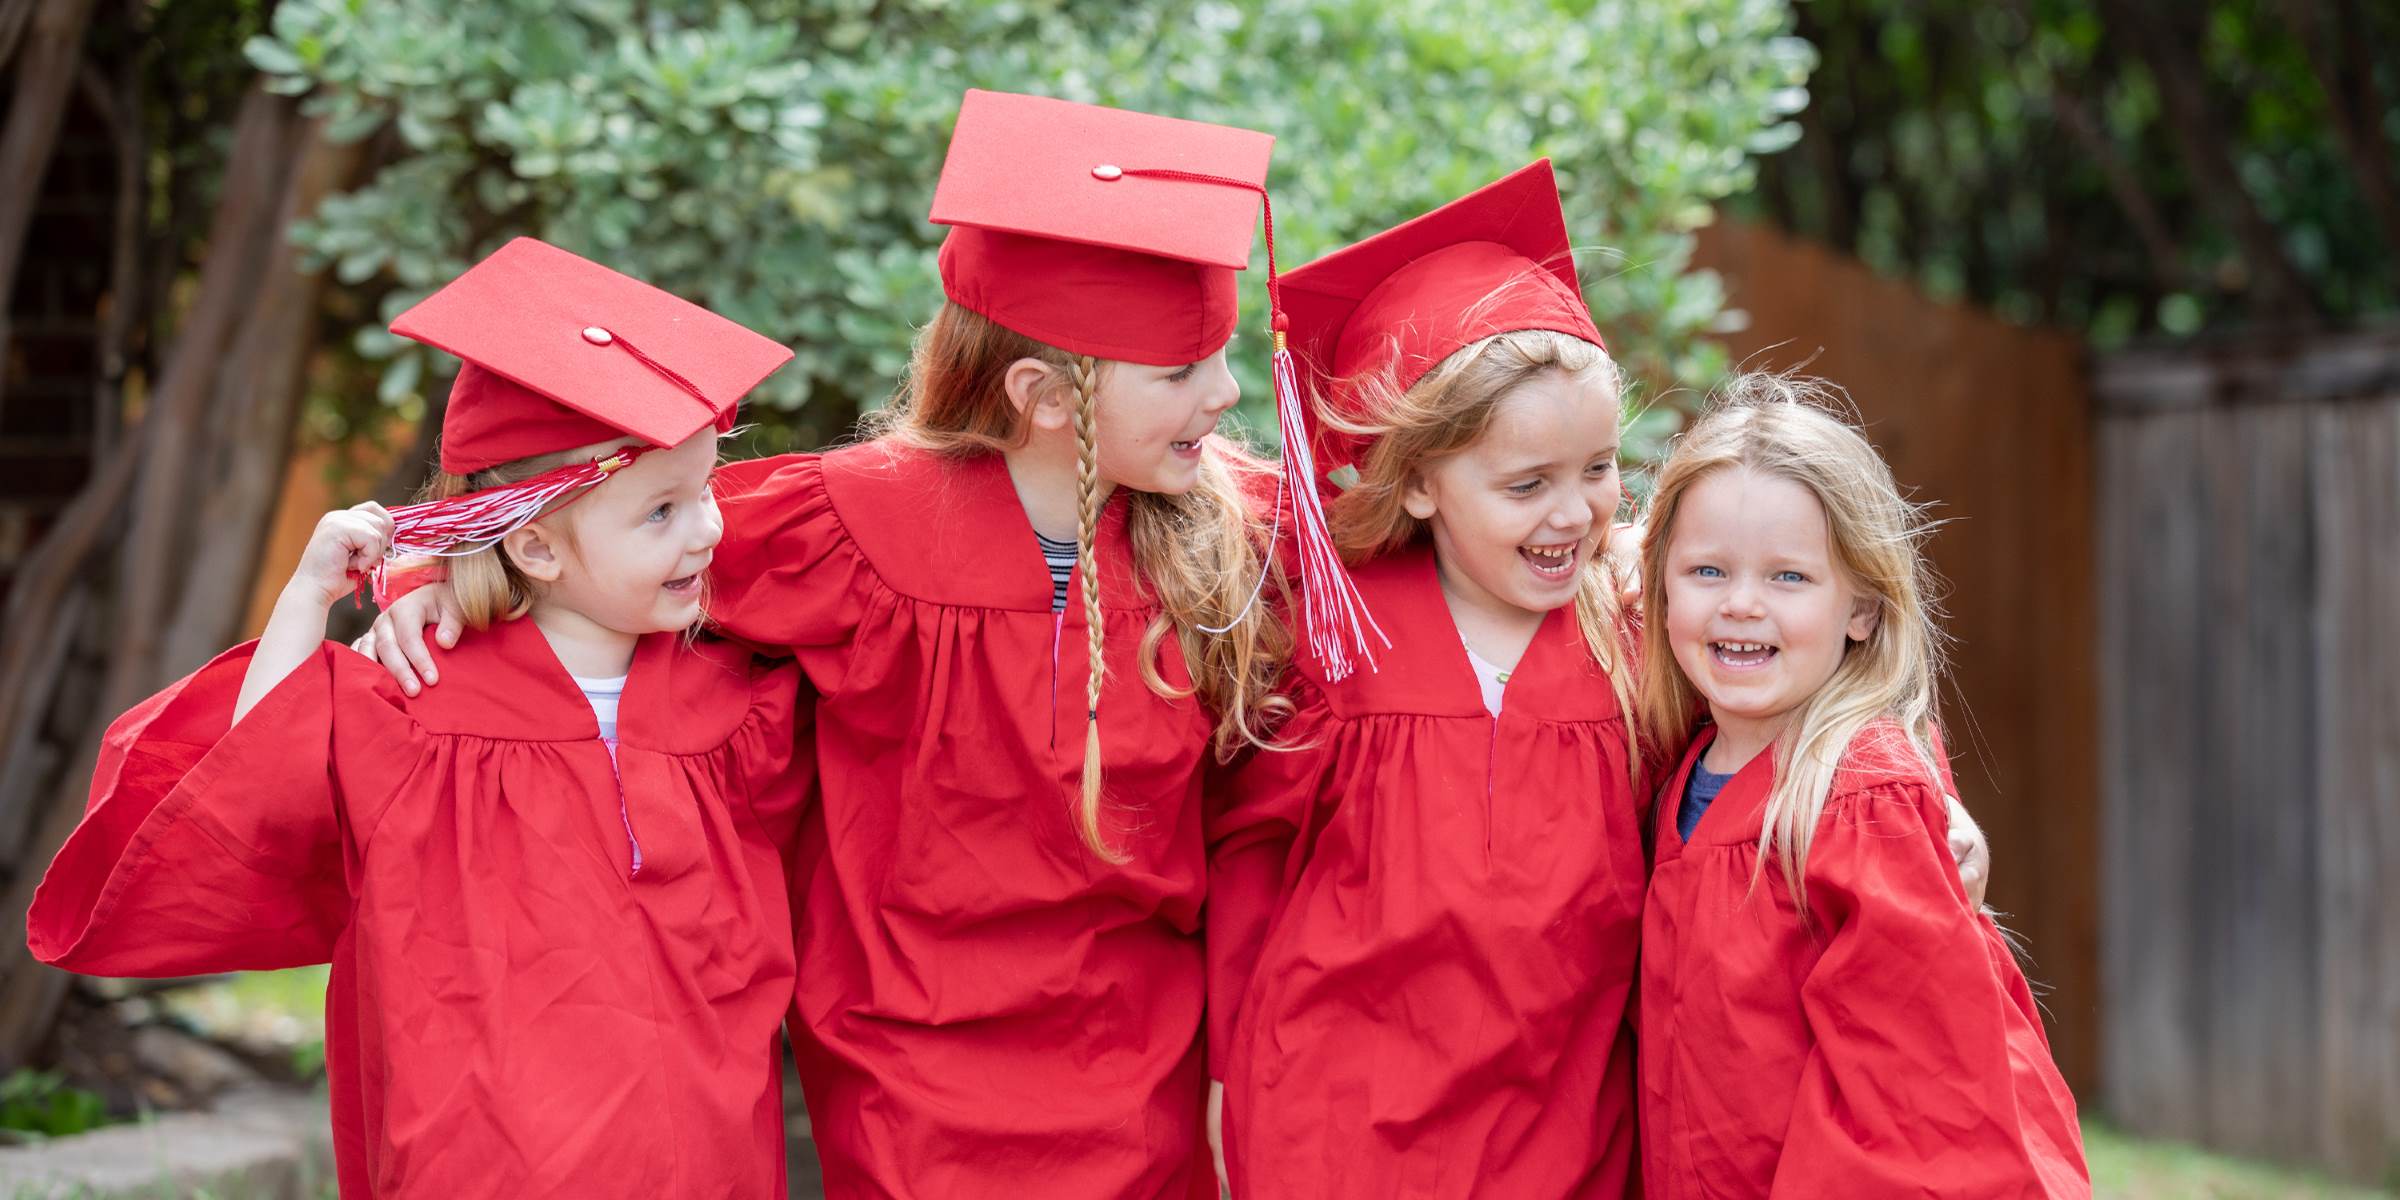 The Perfect Outfit For A Kindergarten Graduation Ceremony